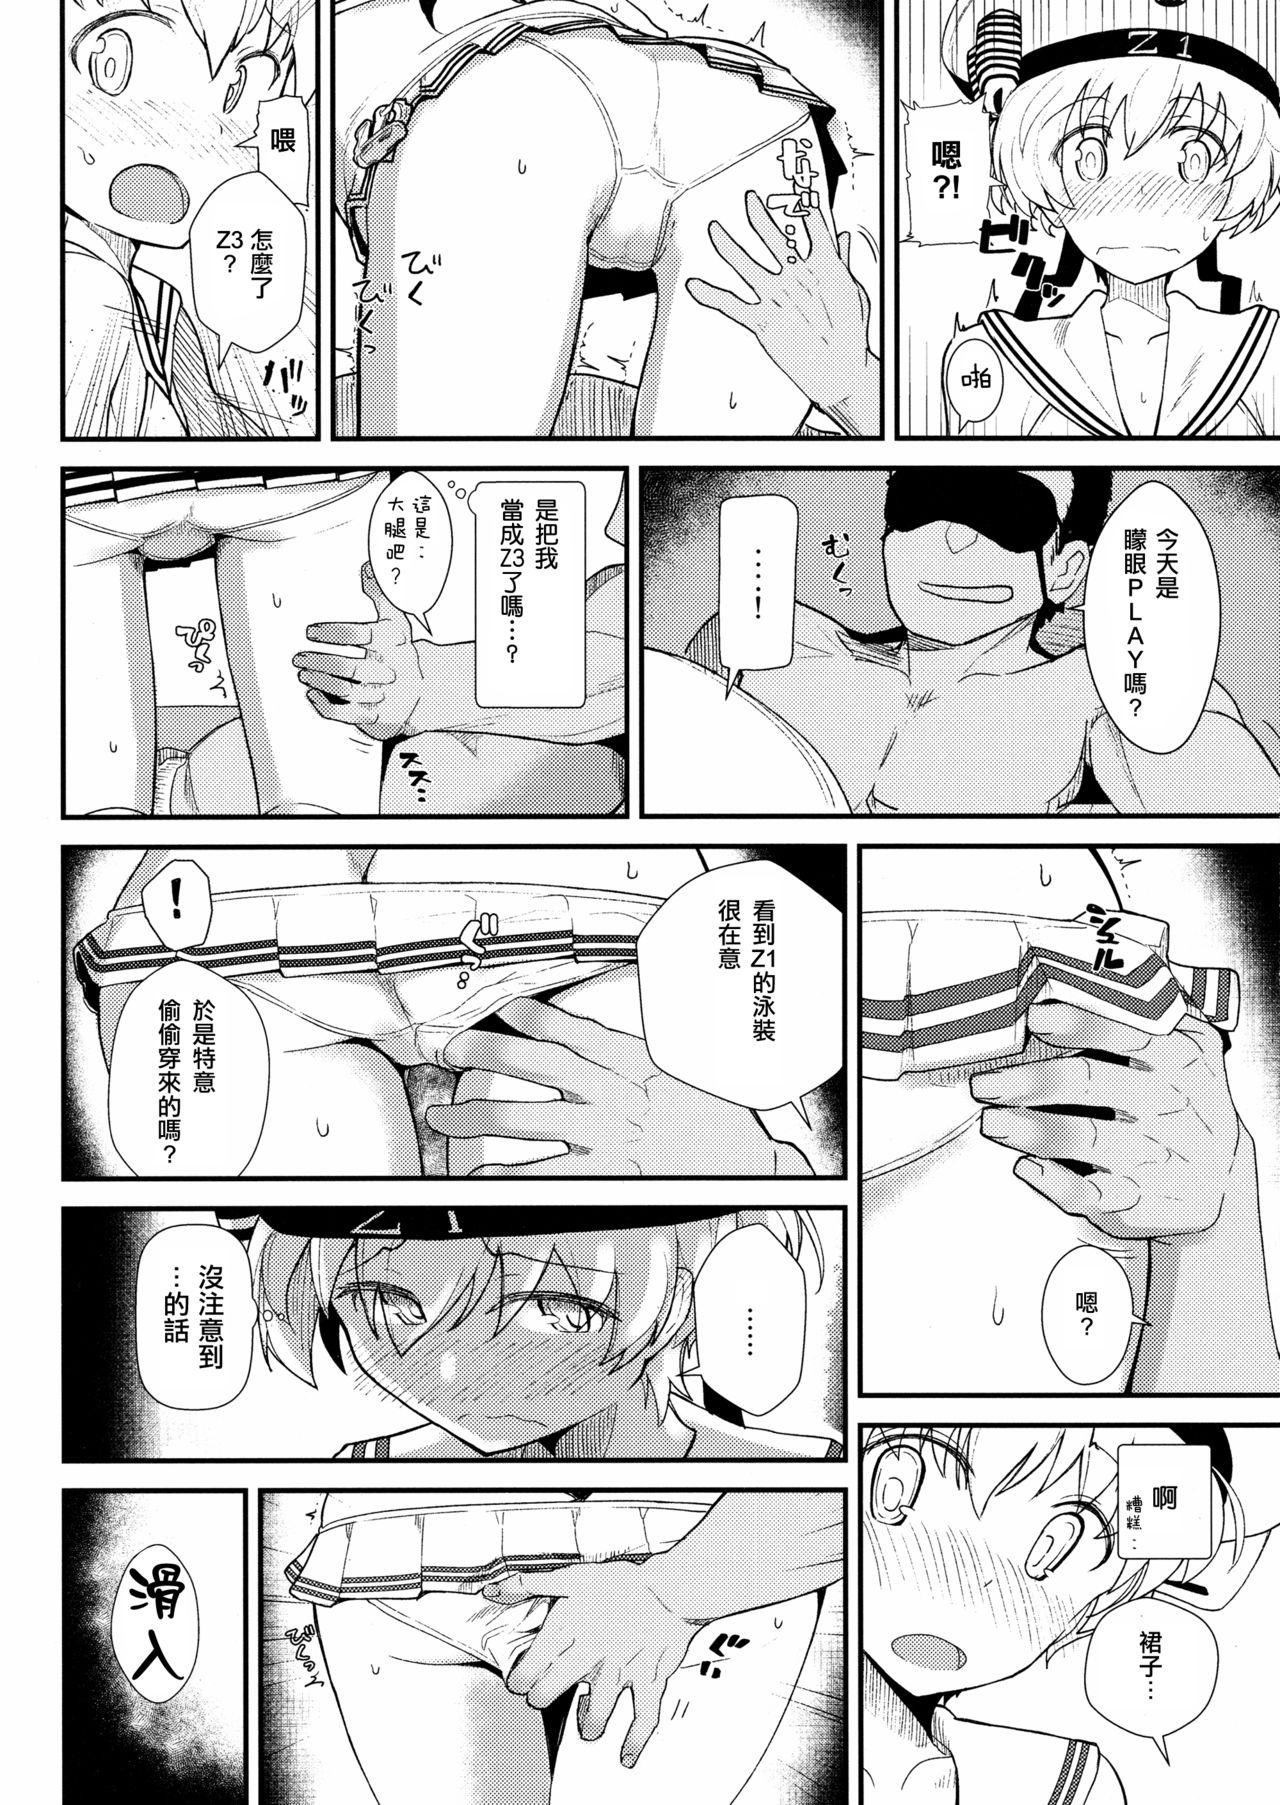 Blowing GIRLFriend's 13 - Kantai collection Tugging - Page 5